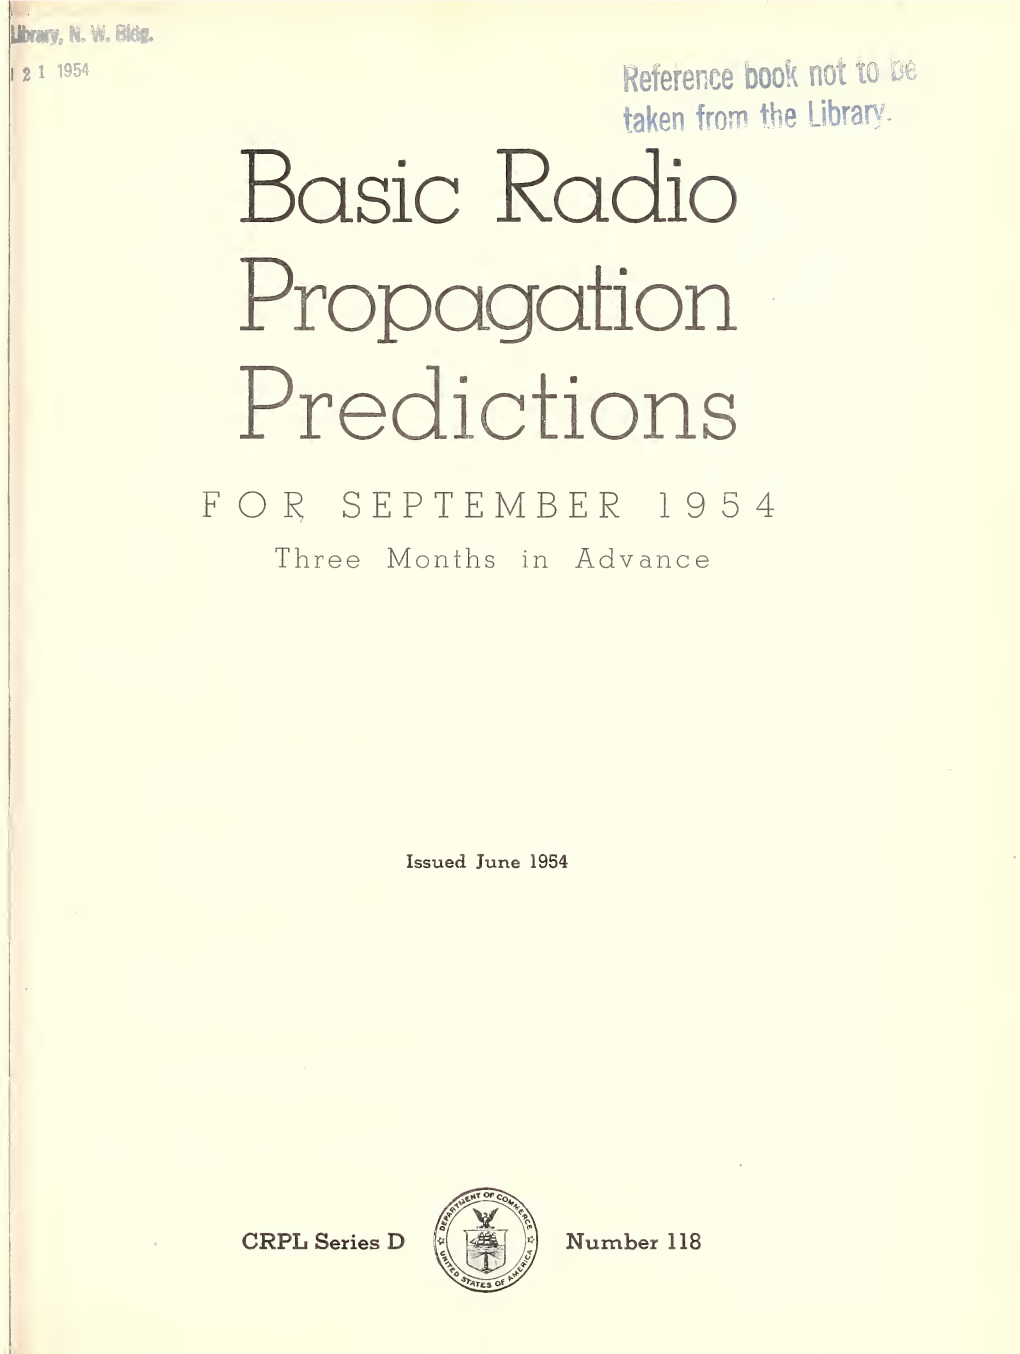 Basic Radio Propagation Predictions for September 1954: Three Months